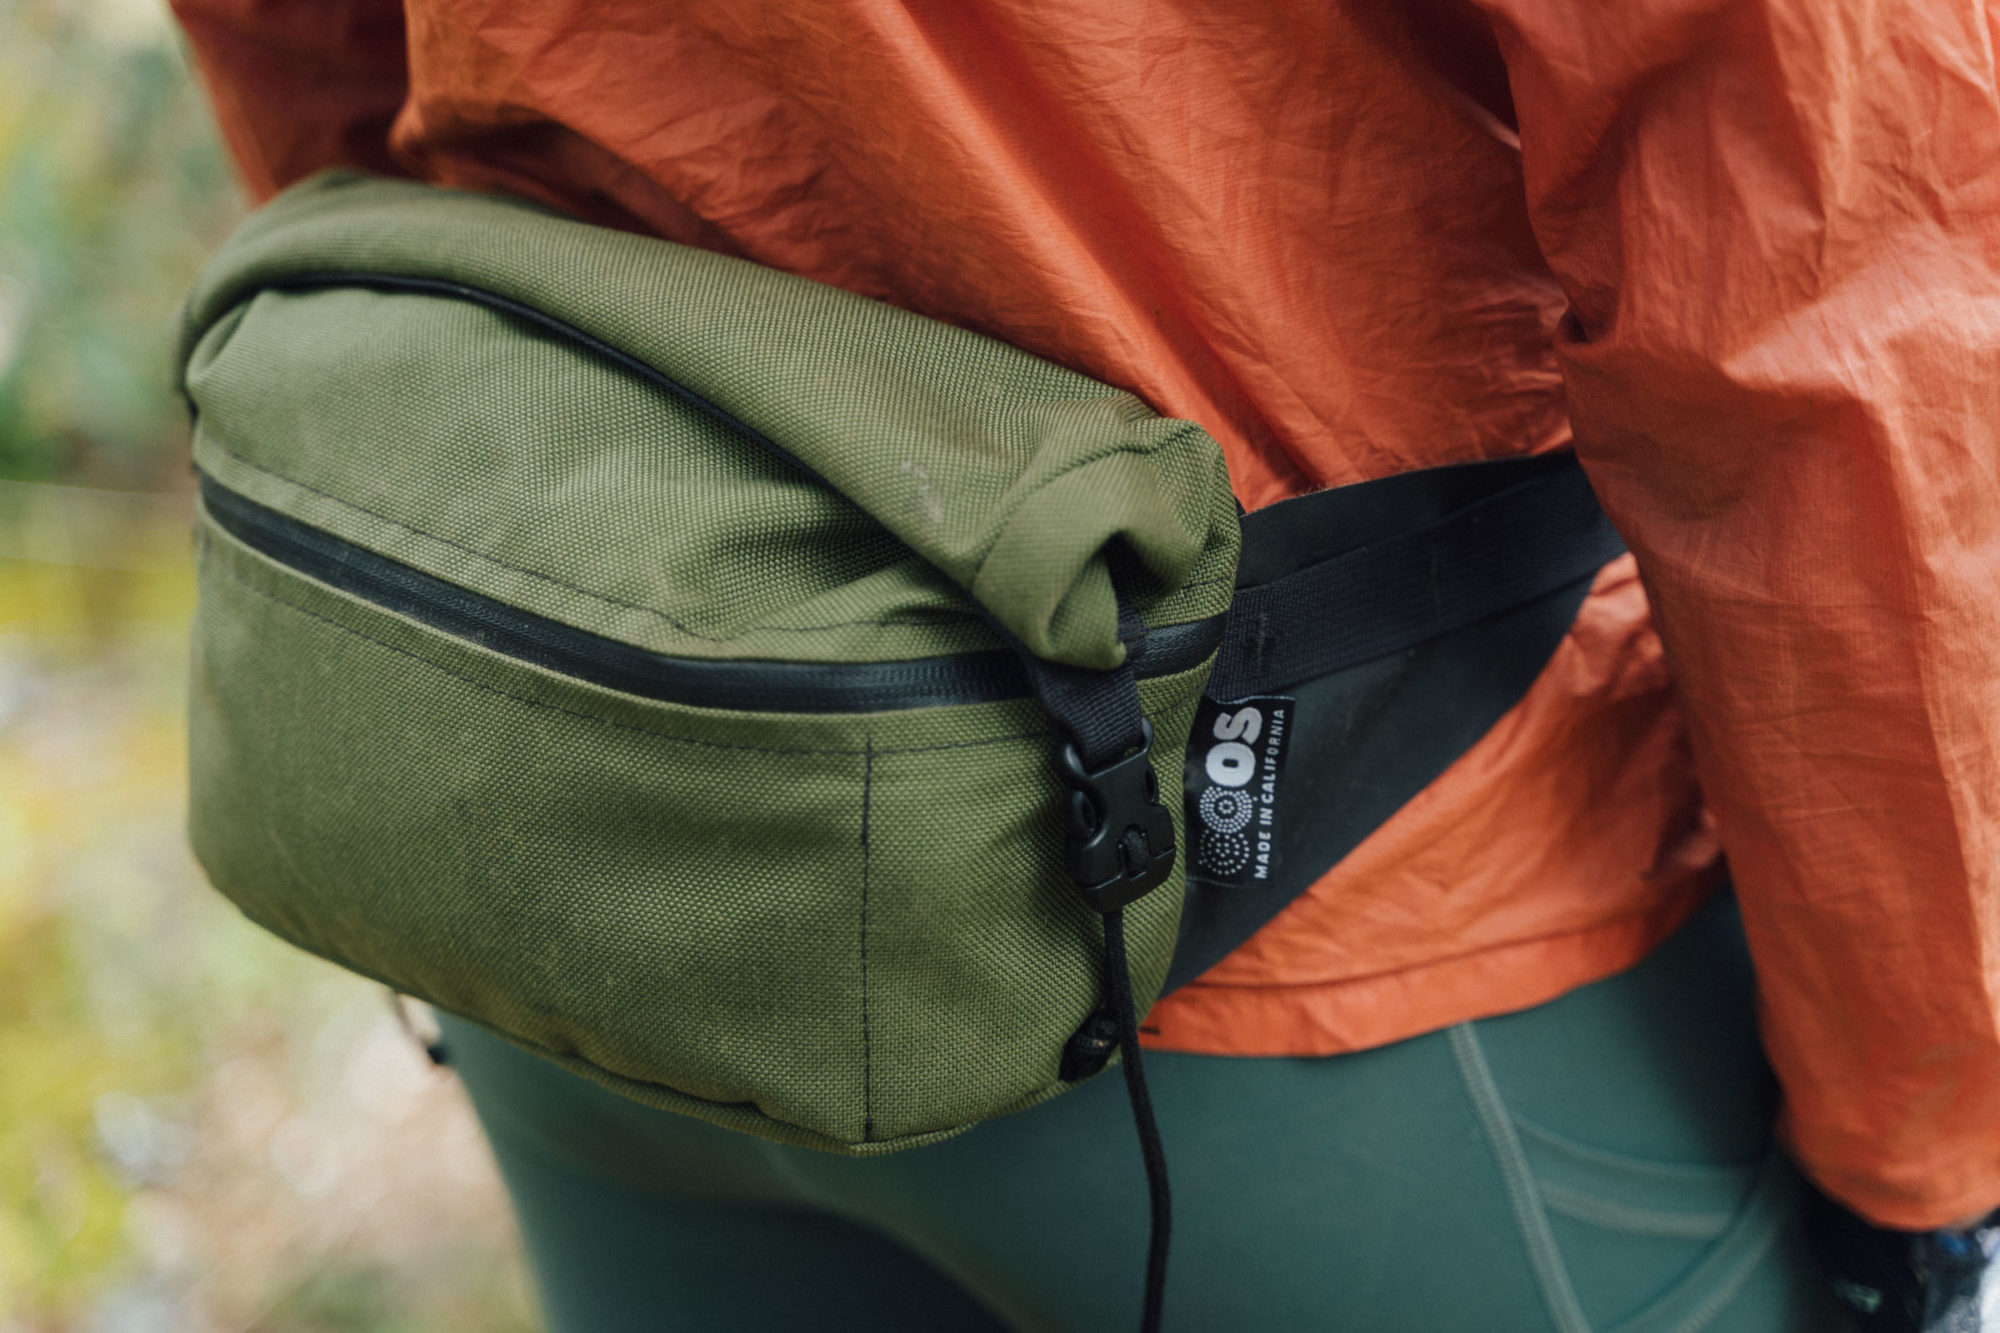 Waterproof Sling Pack or Hip Pack? Pros and cons.